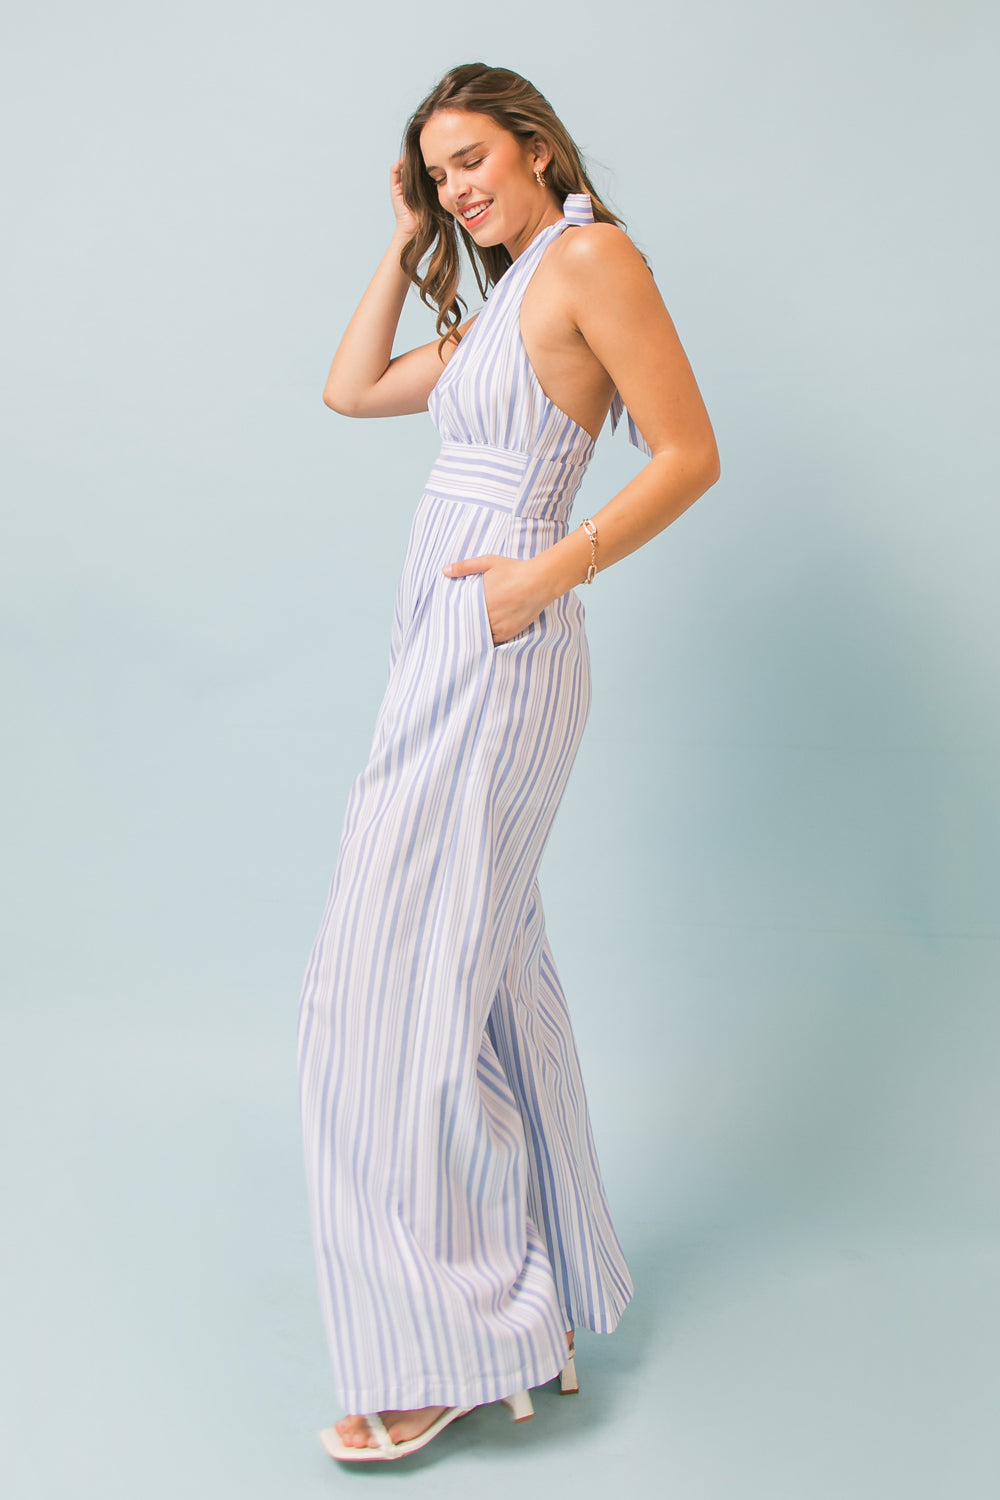 ABSOLUTE EDGE WOVEN JUMPSUIT